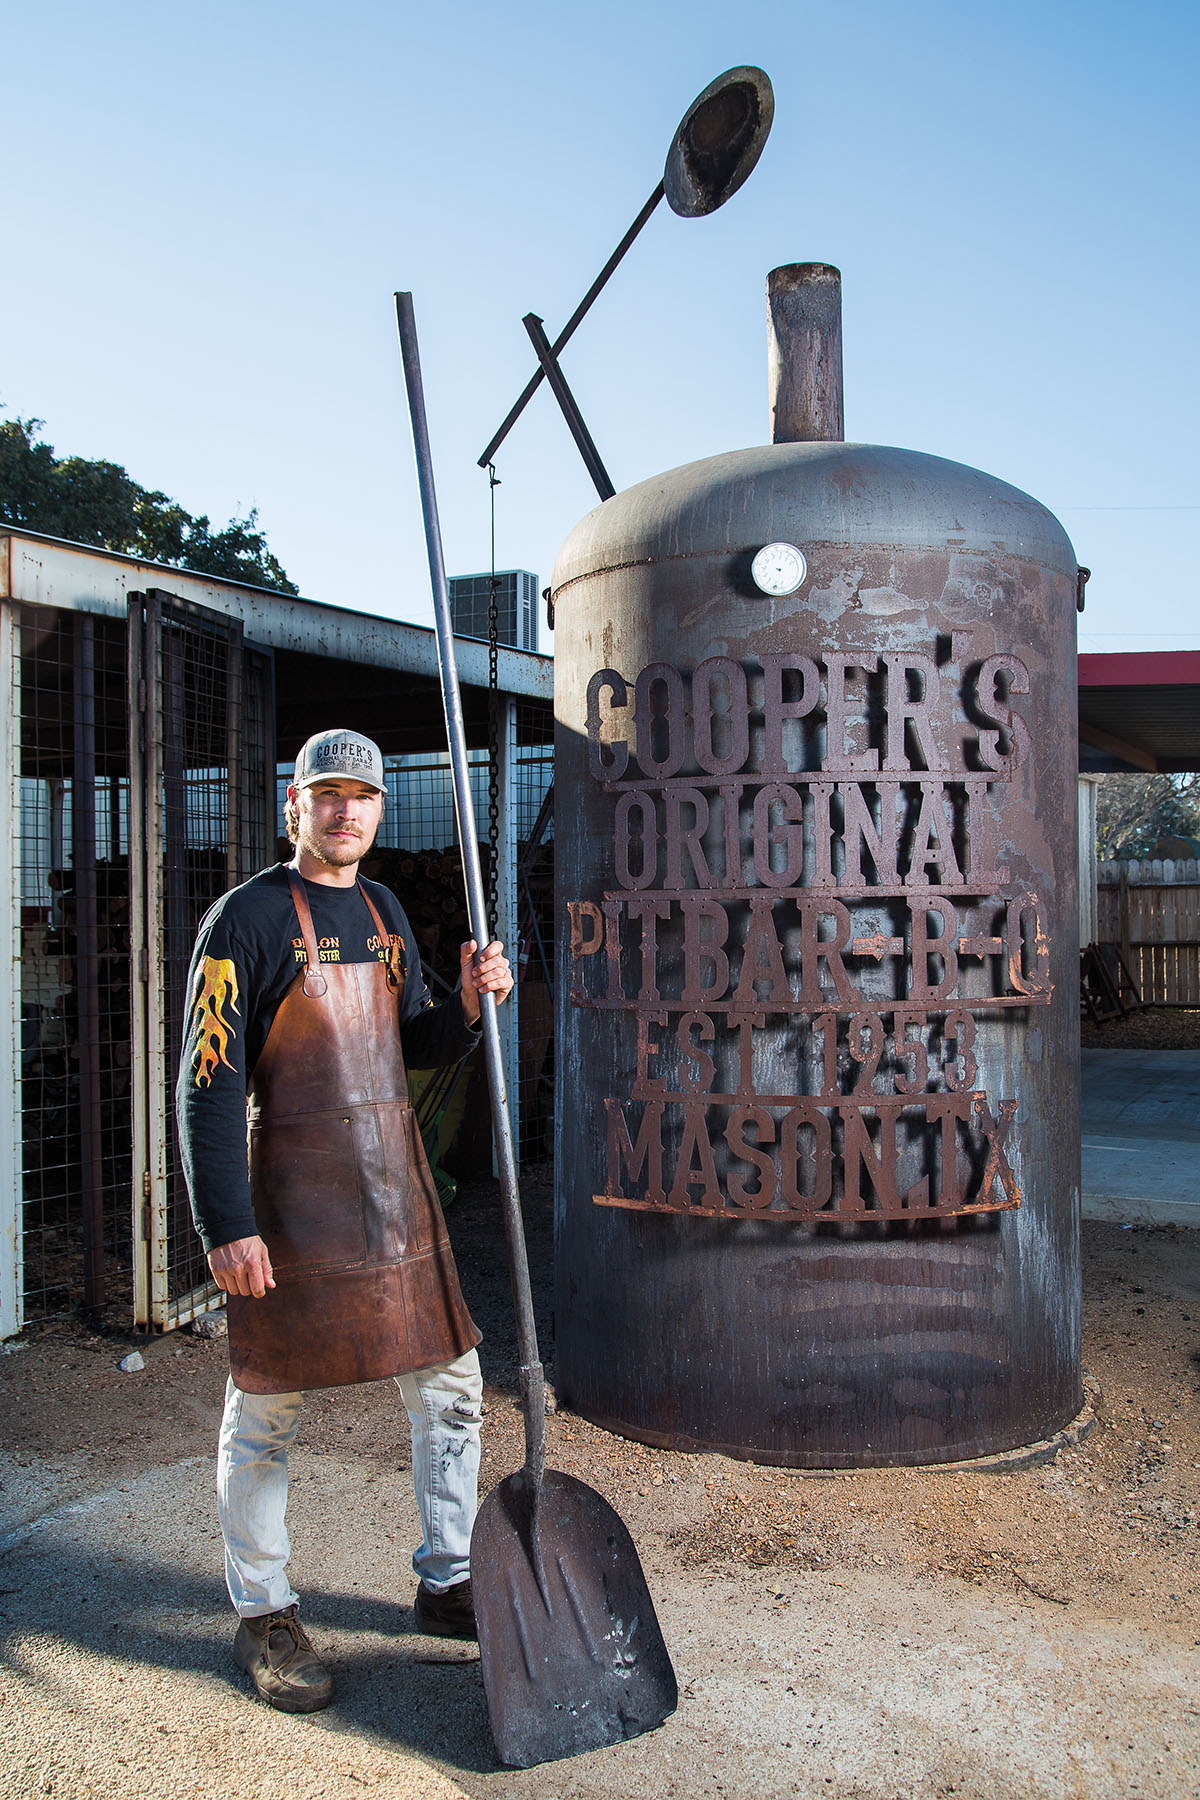 A man in a baseball cap stands in front of a large metal smoker reading "Cooper's Original Pit BBQ"